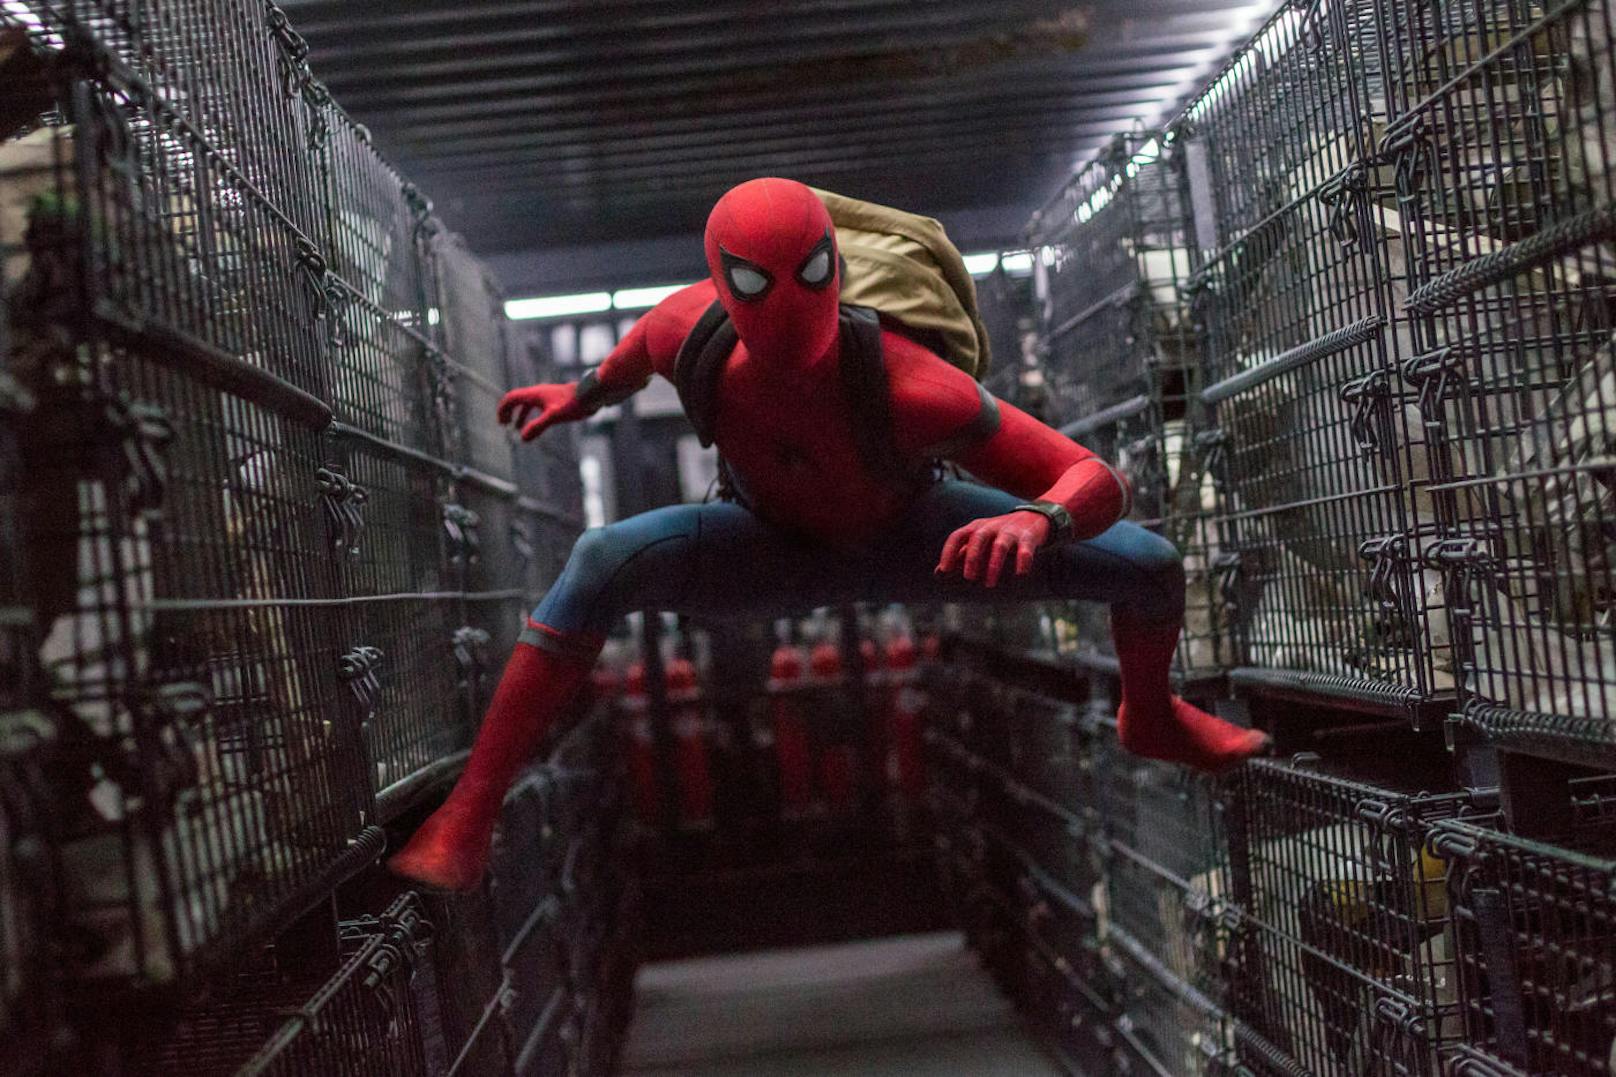 Tom Holland in "Spider-Man: Homecoming"